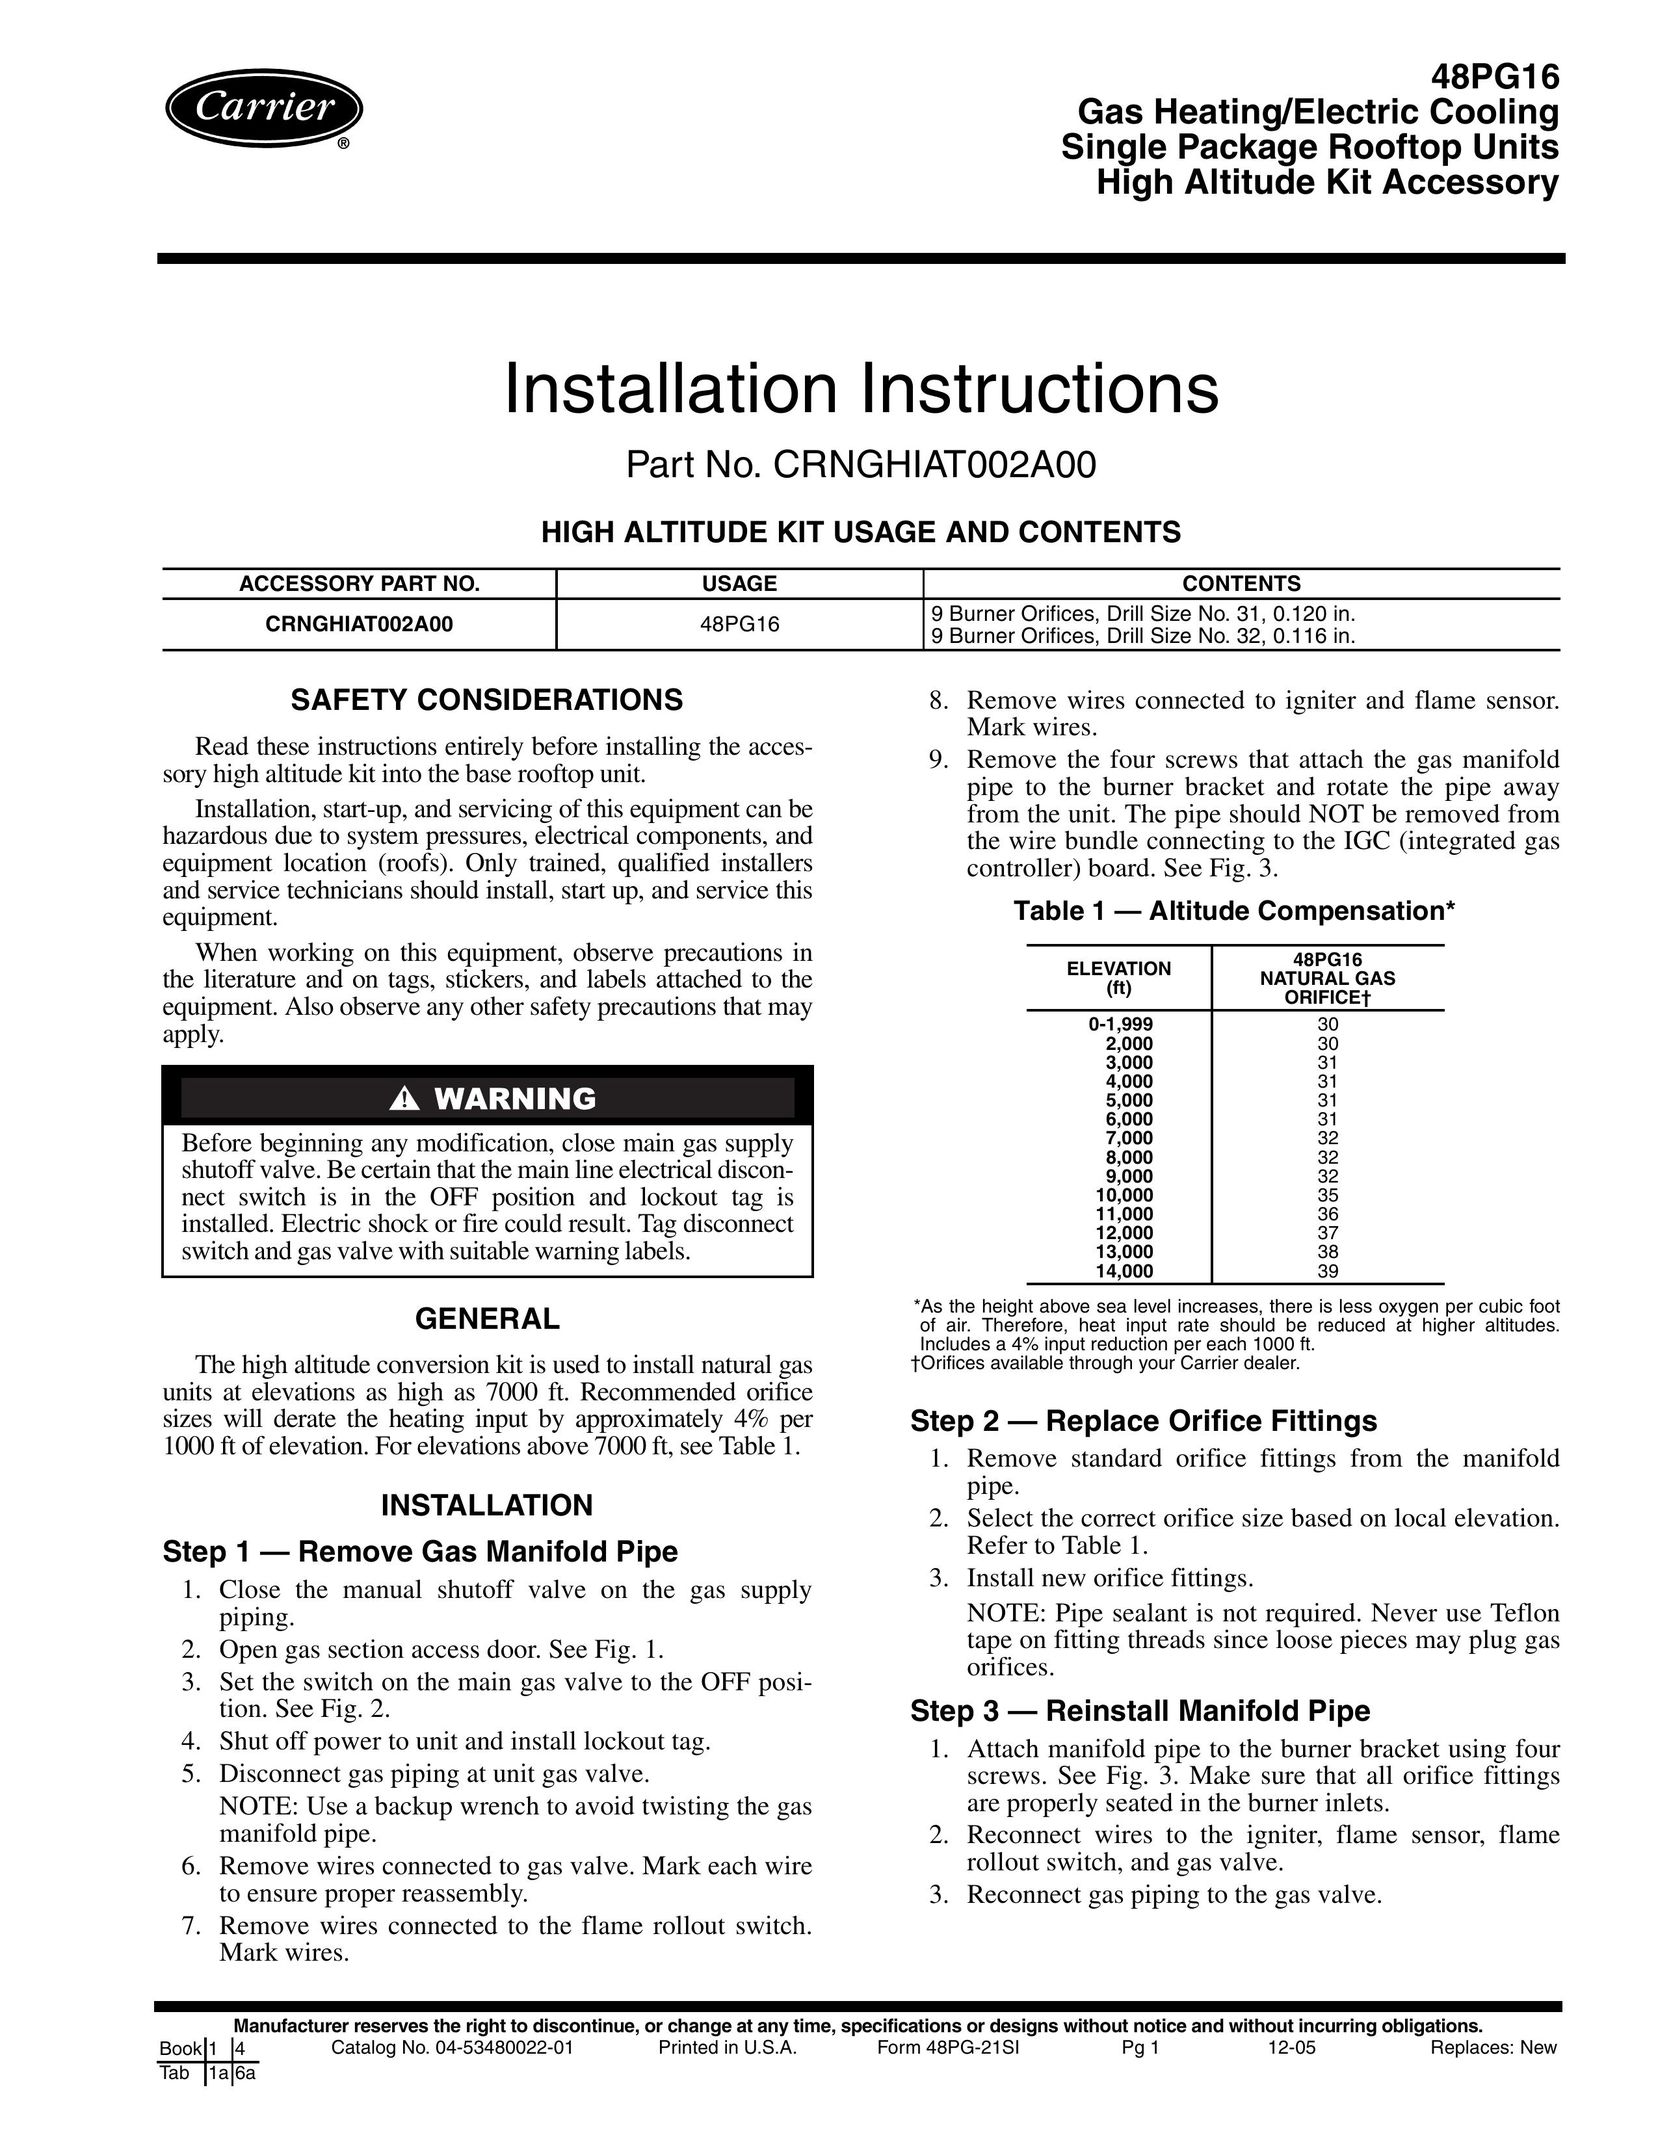 Carrier 48PG16 Gas Heater User Manual